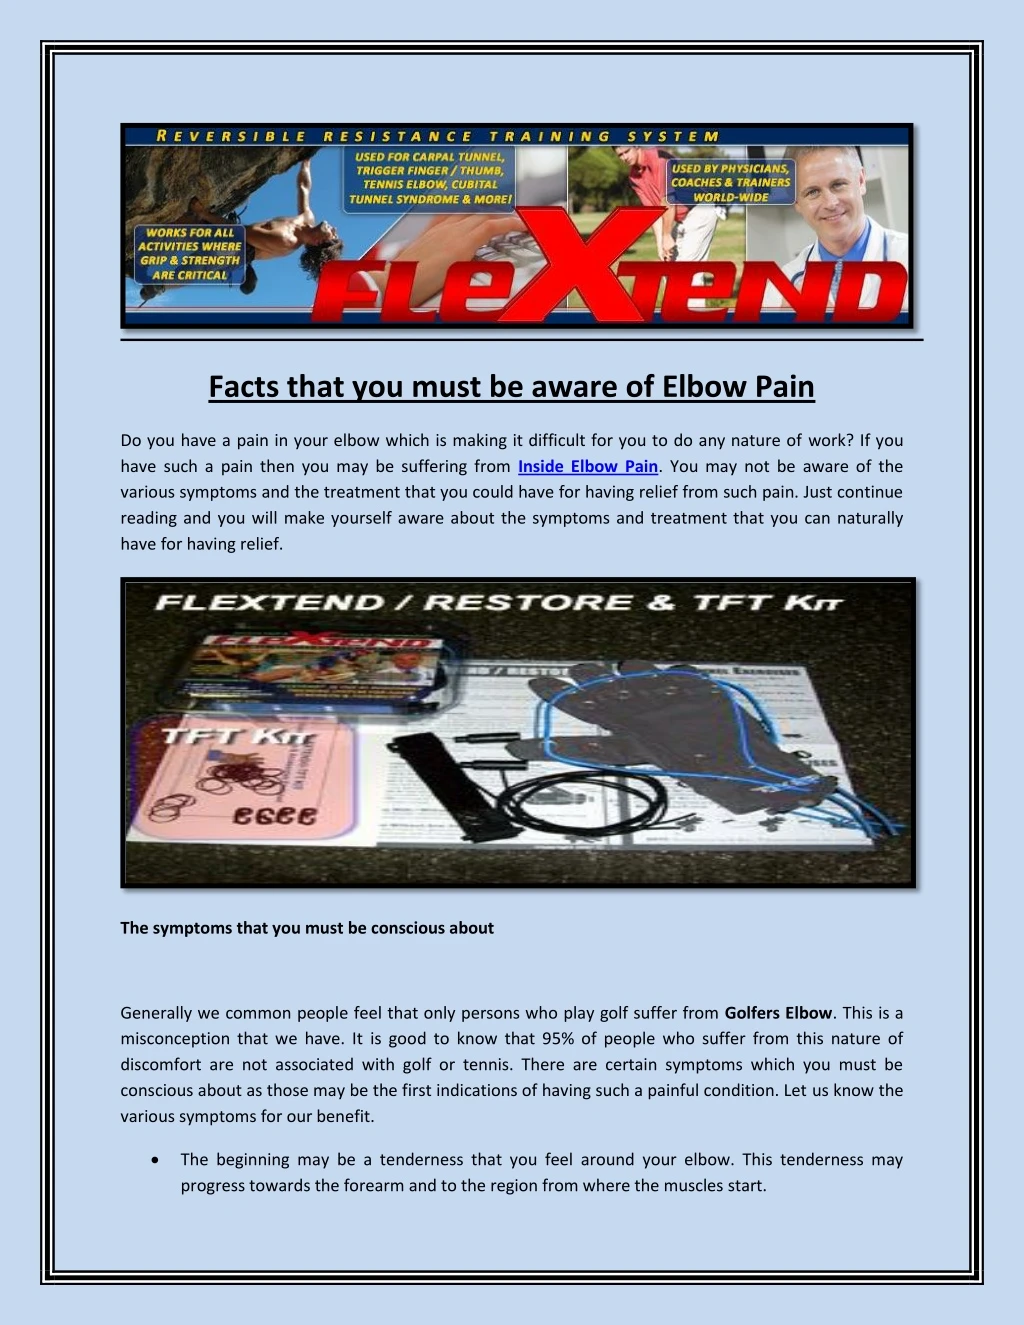 facts that you must be aware of elbow pain